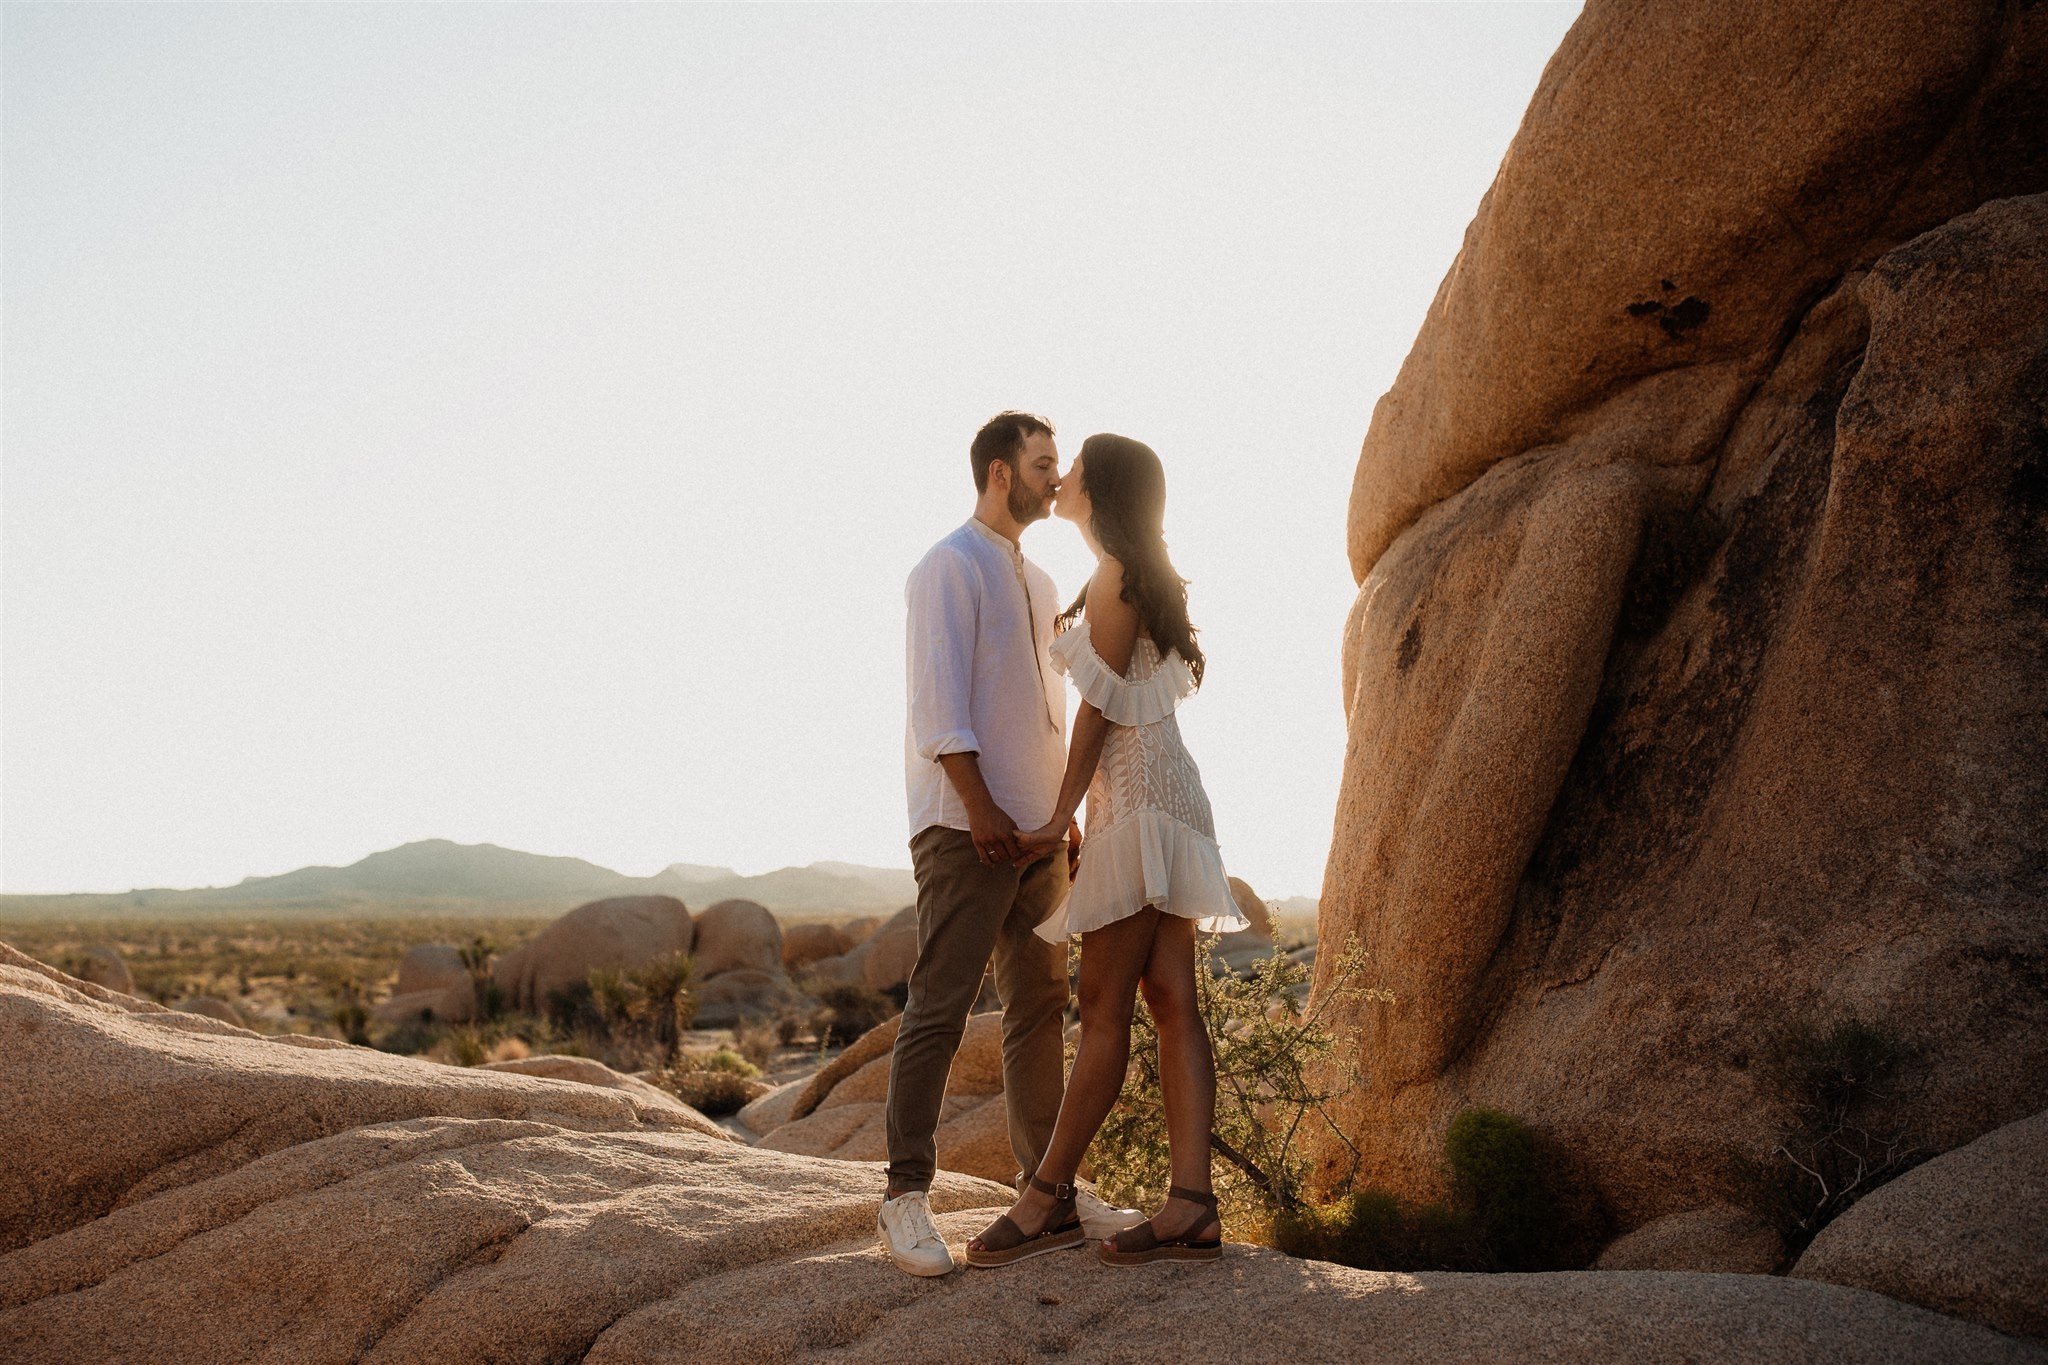 Joshua Tree Couples Session Surprise Proposal - Will Khoury Photography_32.jpg